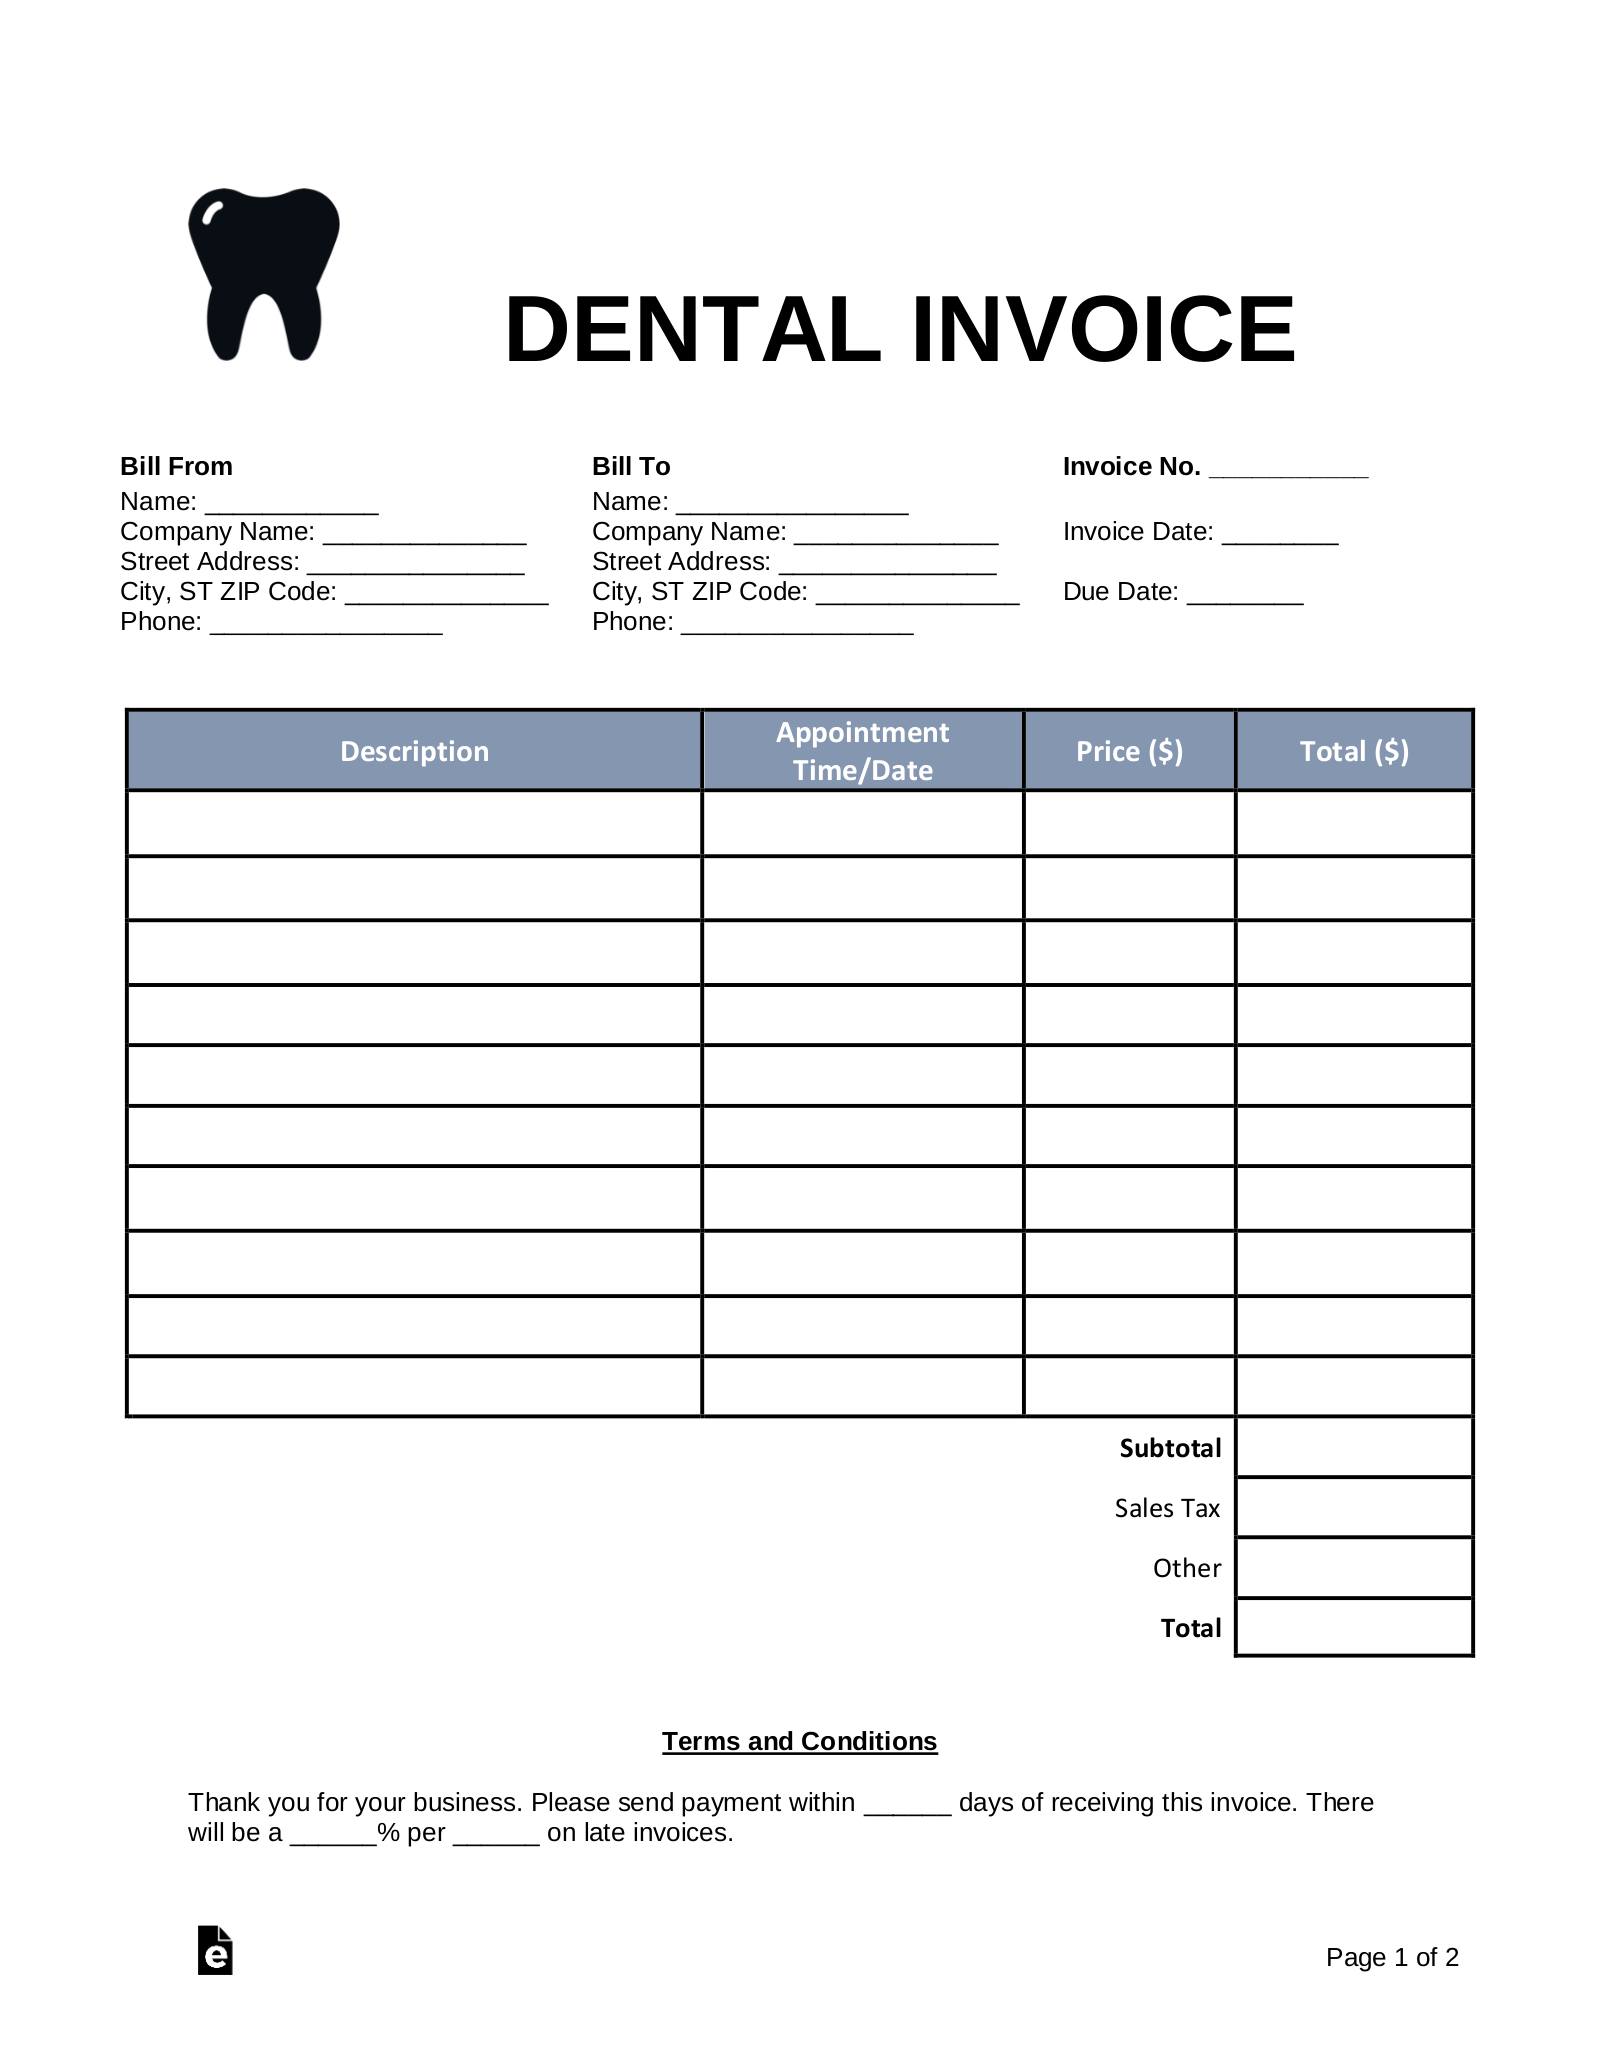 example of dental invoice template